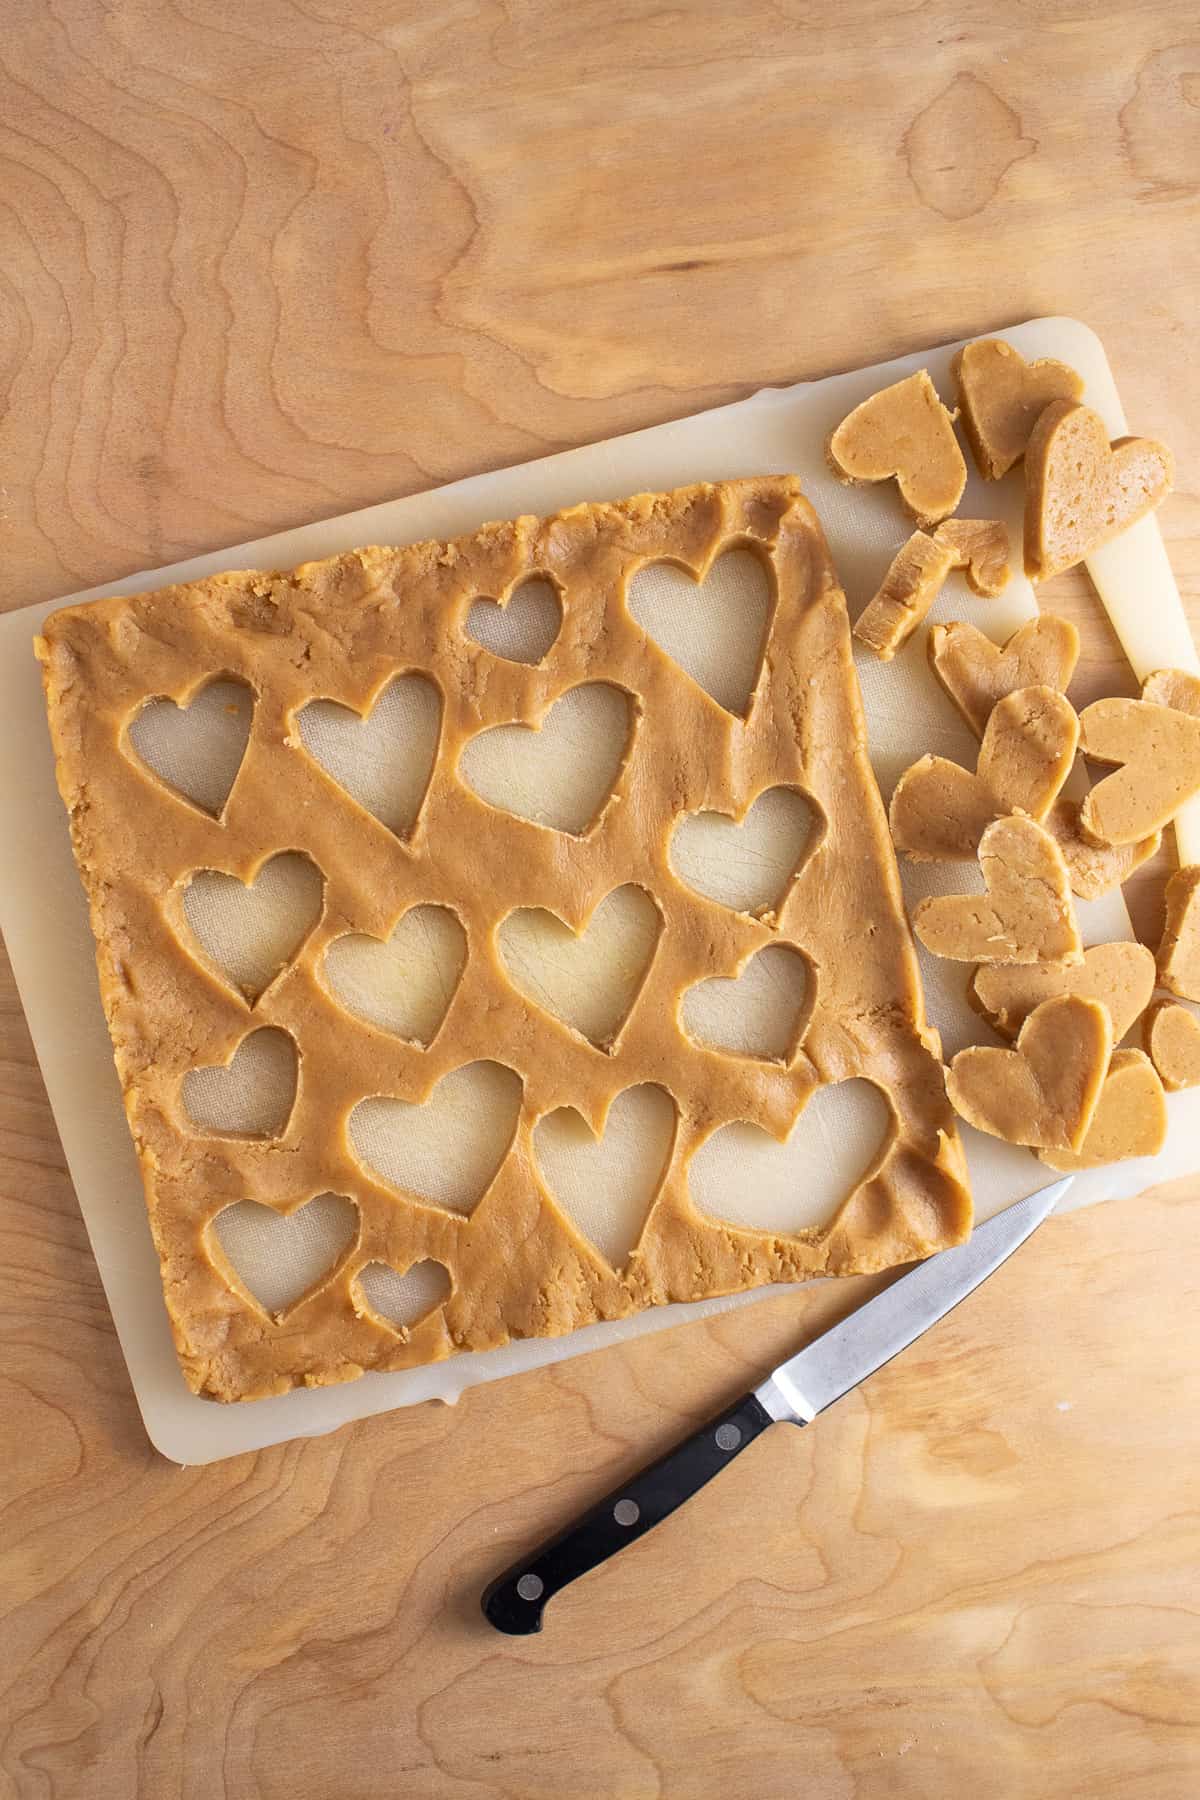 A paring knife is used to cut heart shapes out of the chilled layer of dough.